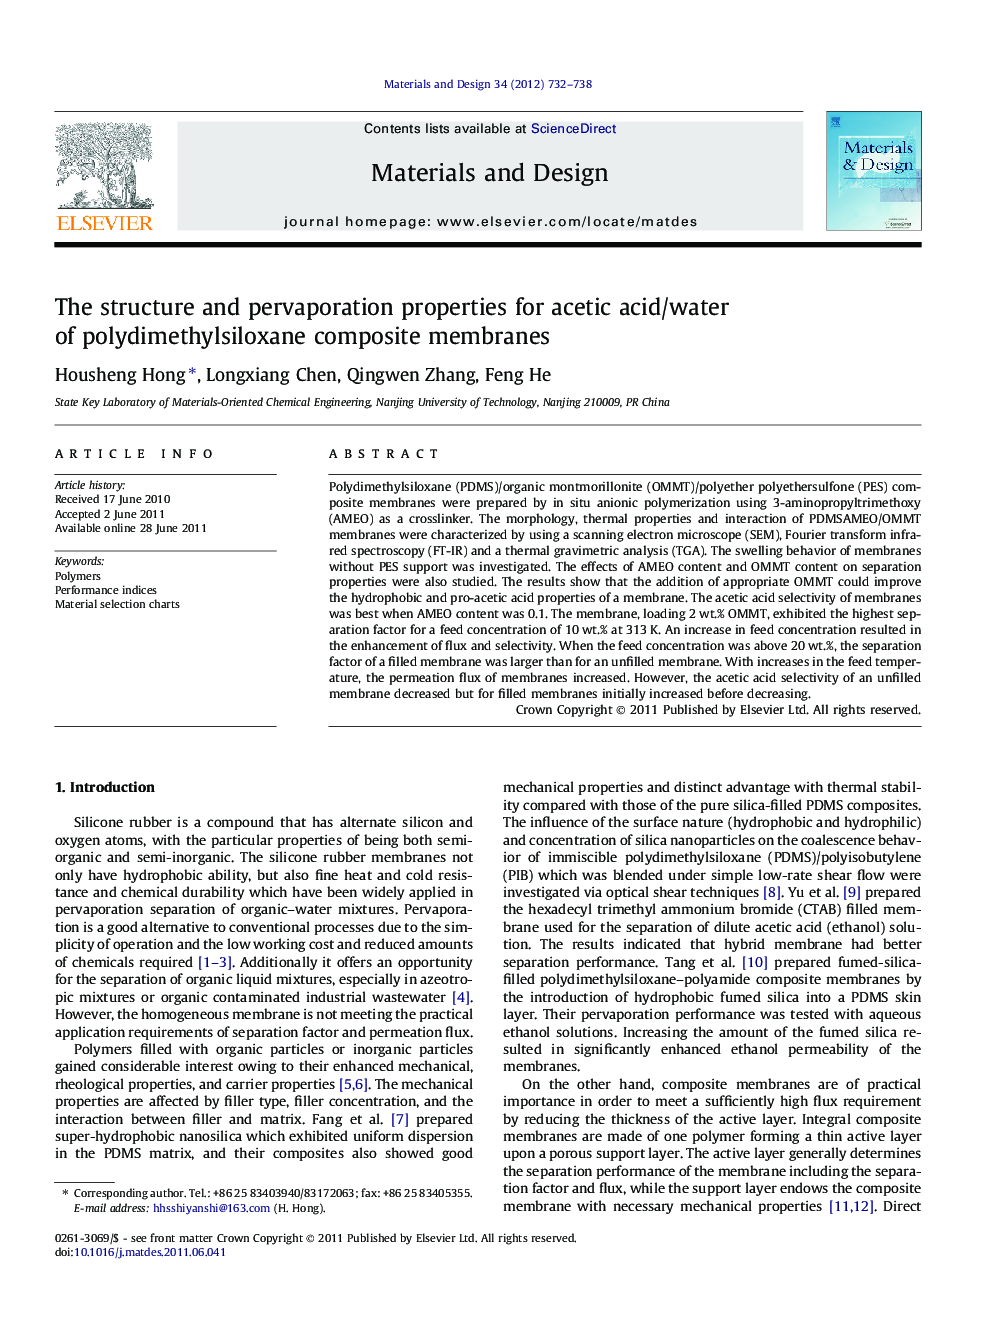 The structure and pervaporation properties for acetic acid/water of polydimethylsiloxane composite membranes